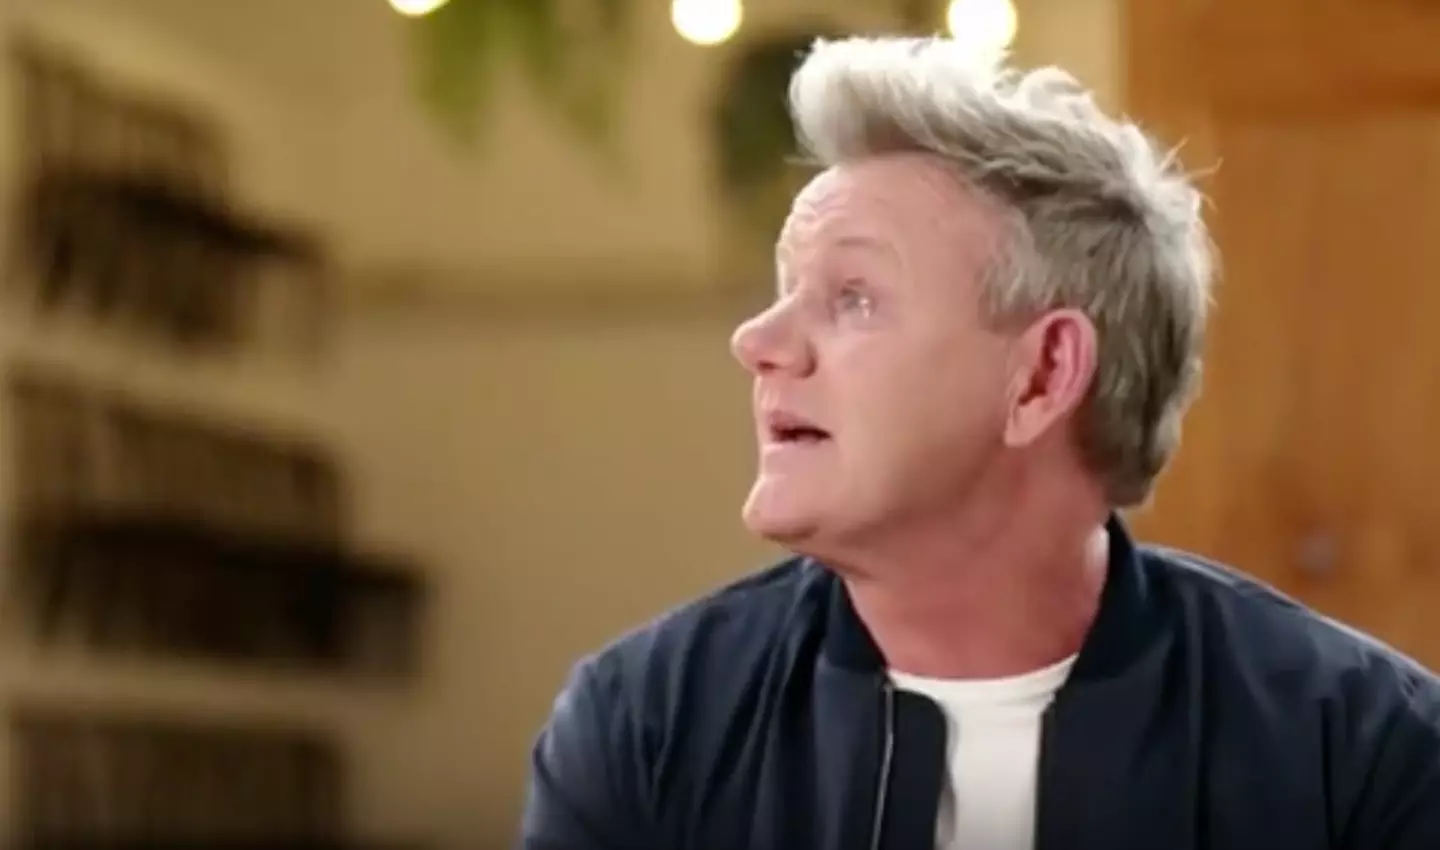 Gordon Ramsay paid tribute to Zonfrillo in a TV special.